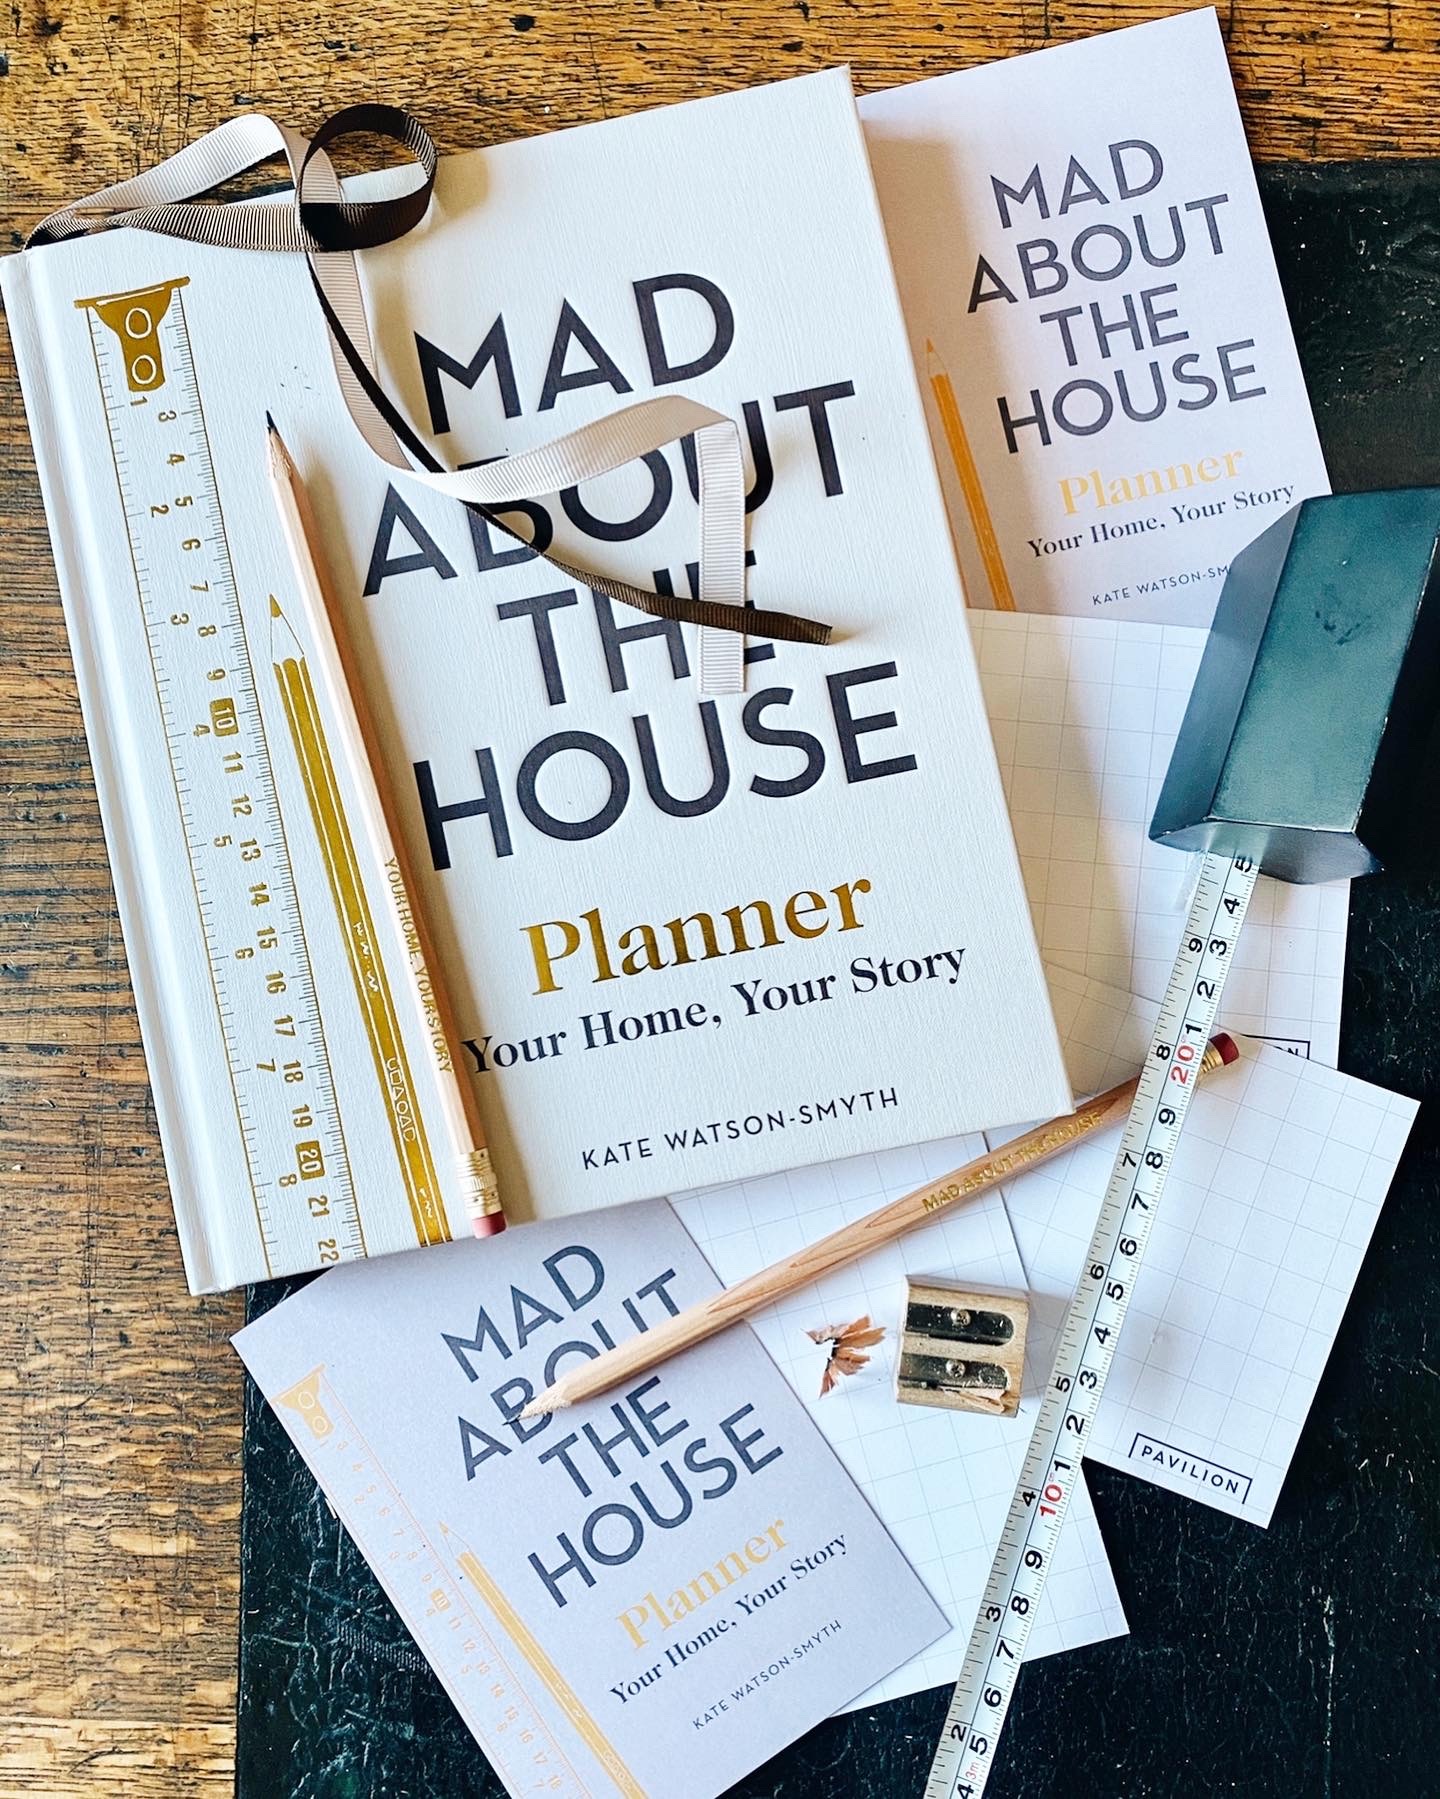 Mad About the House, new book scattered with stationery and tape measure on wooden table.